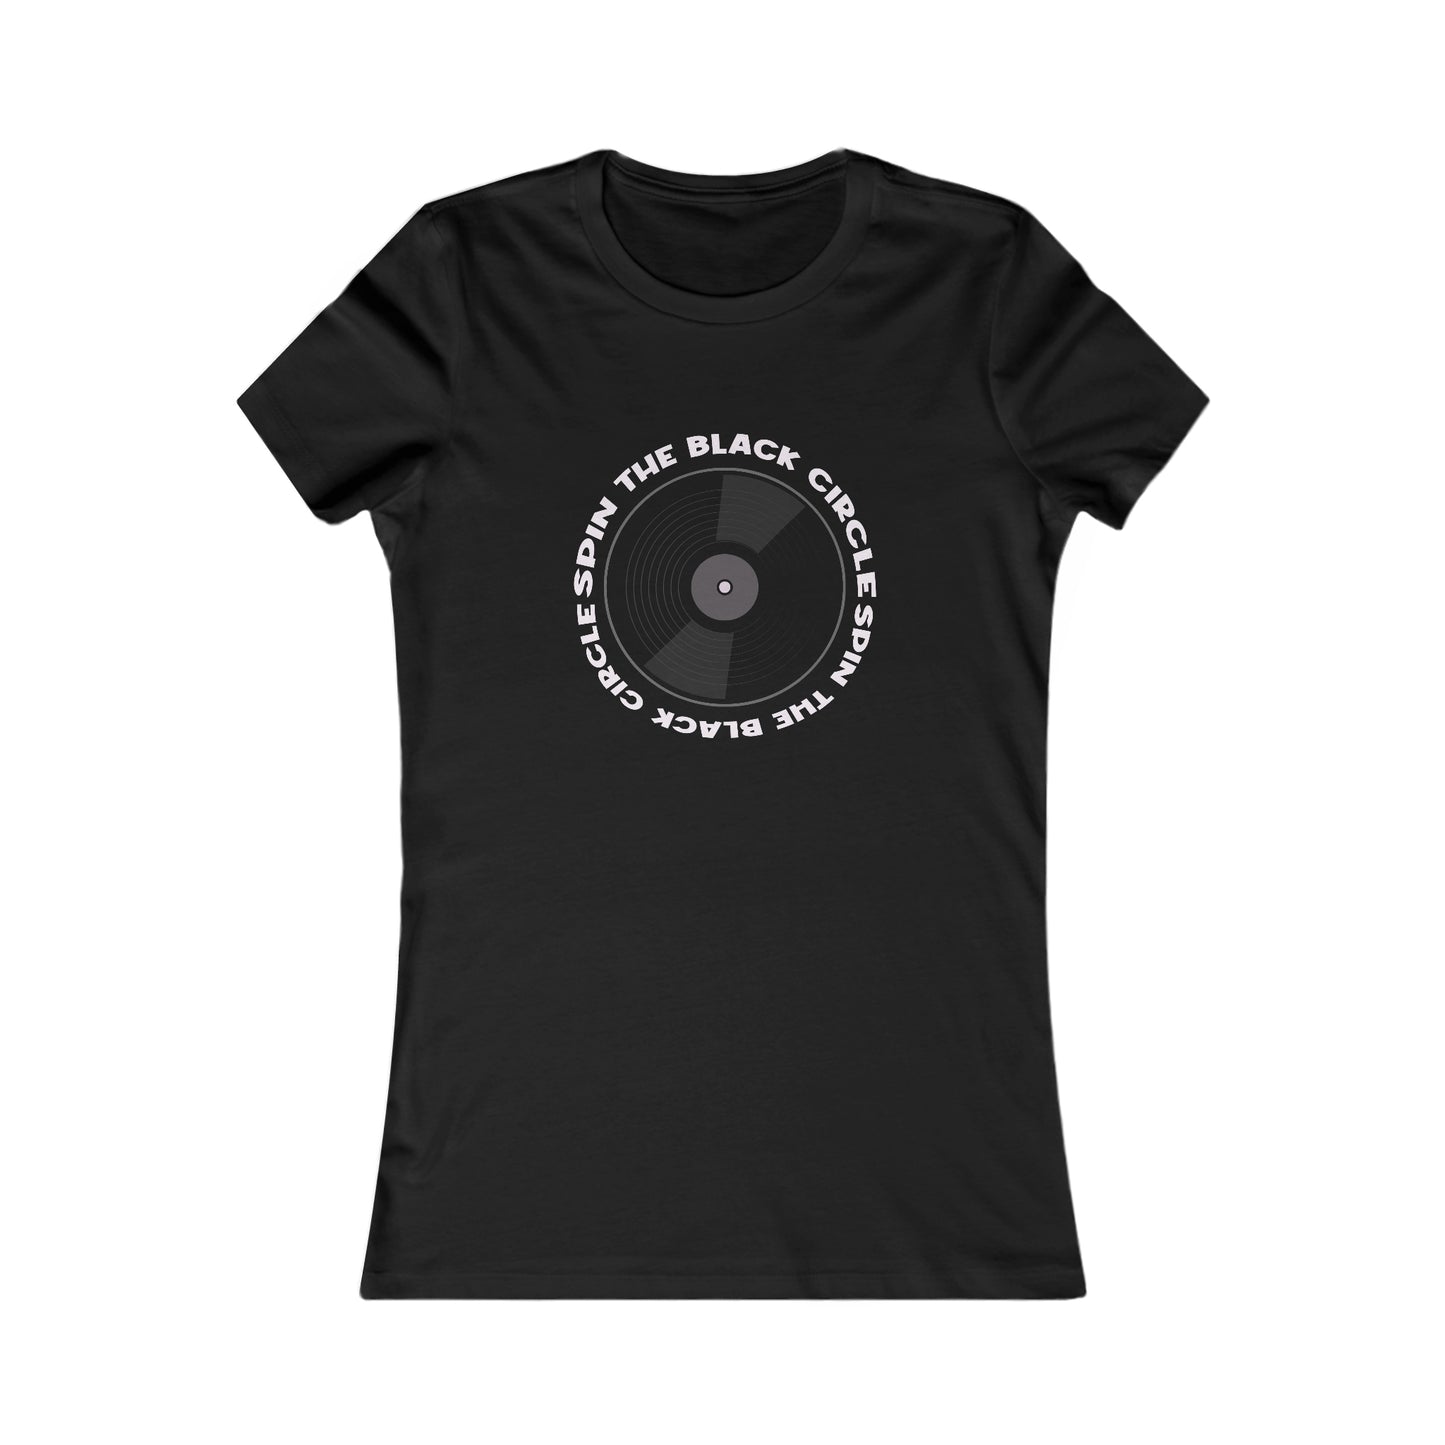 SPIN THE BLACK CIRCLE WOMEN'S T